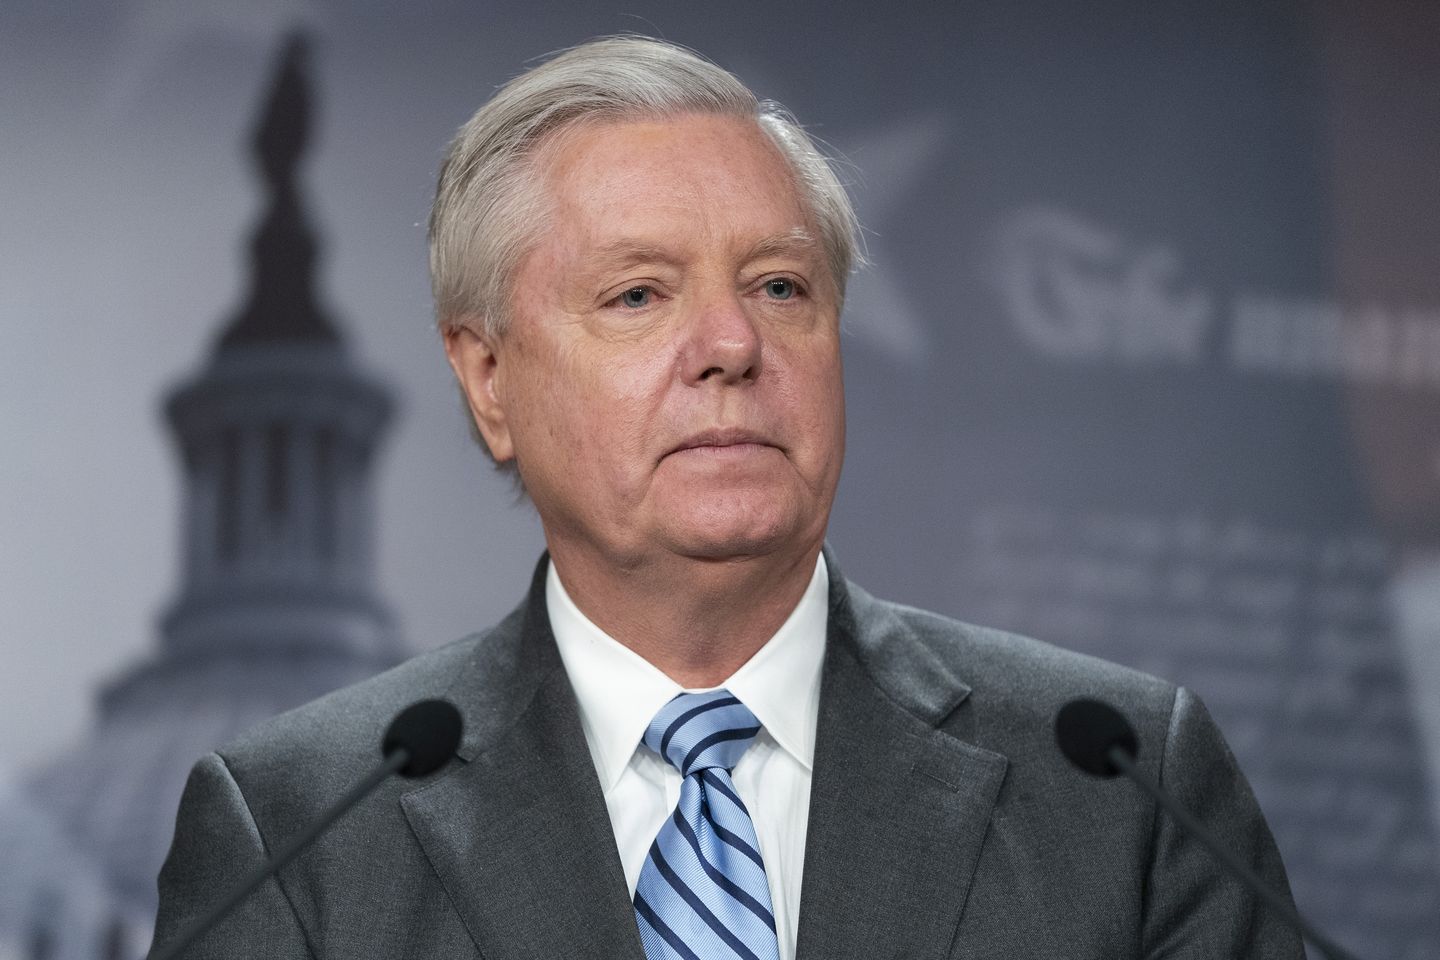 Sen. Lindsey Graham predicts 'riots' if Donald Trump is prosecuted